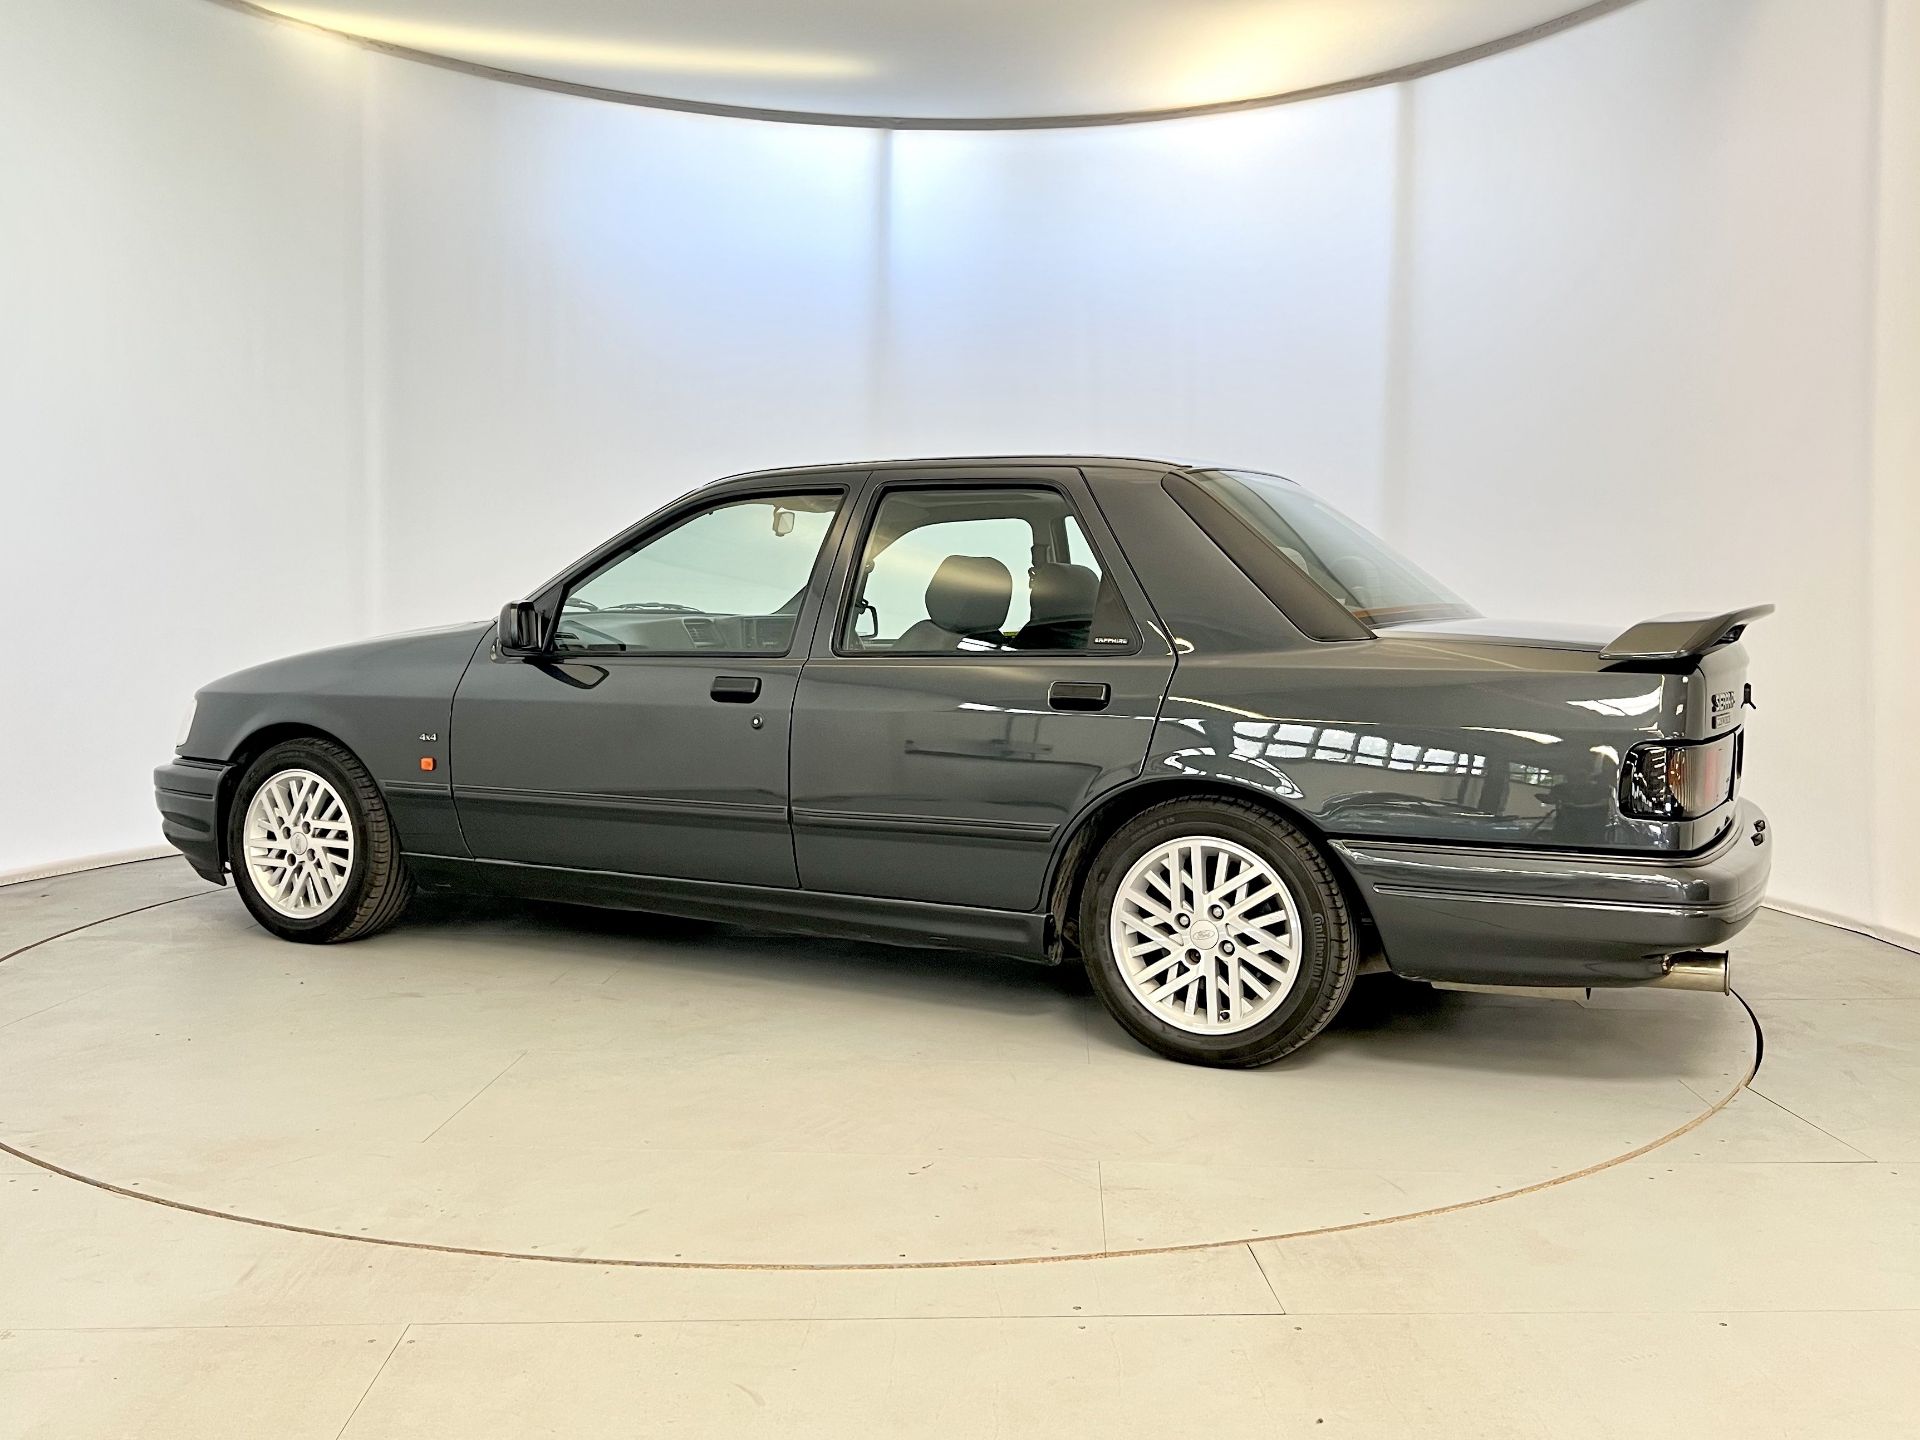 Ford Sierra Sapphire Cosworth - Image 6 of 37